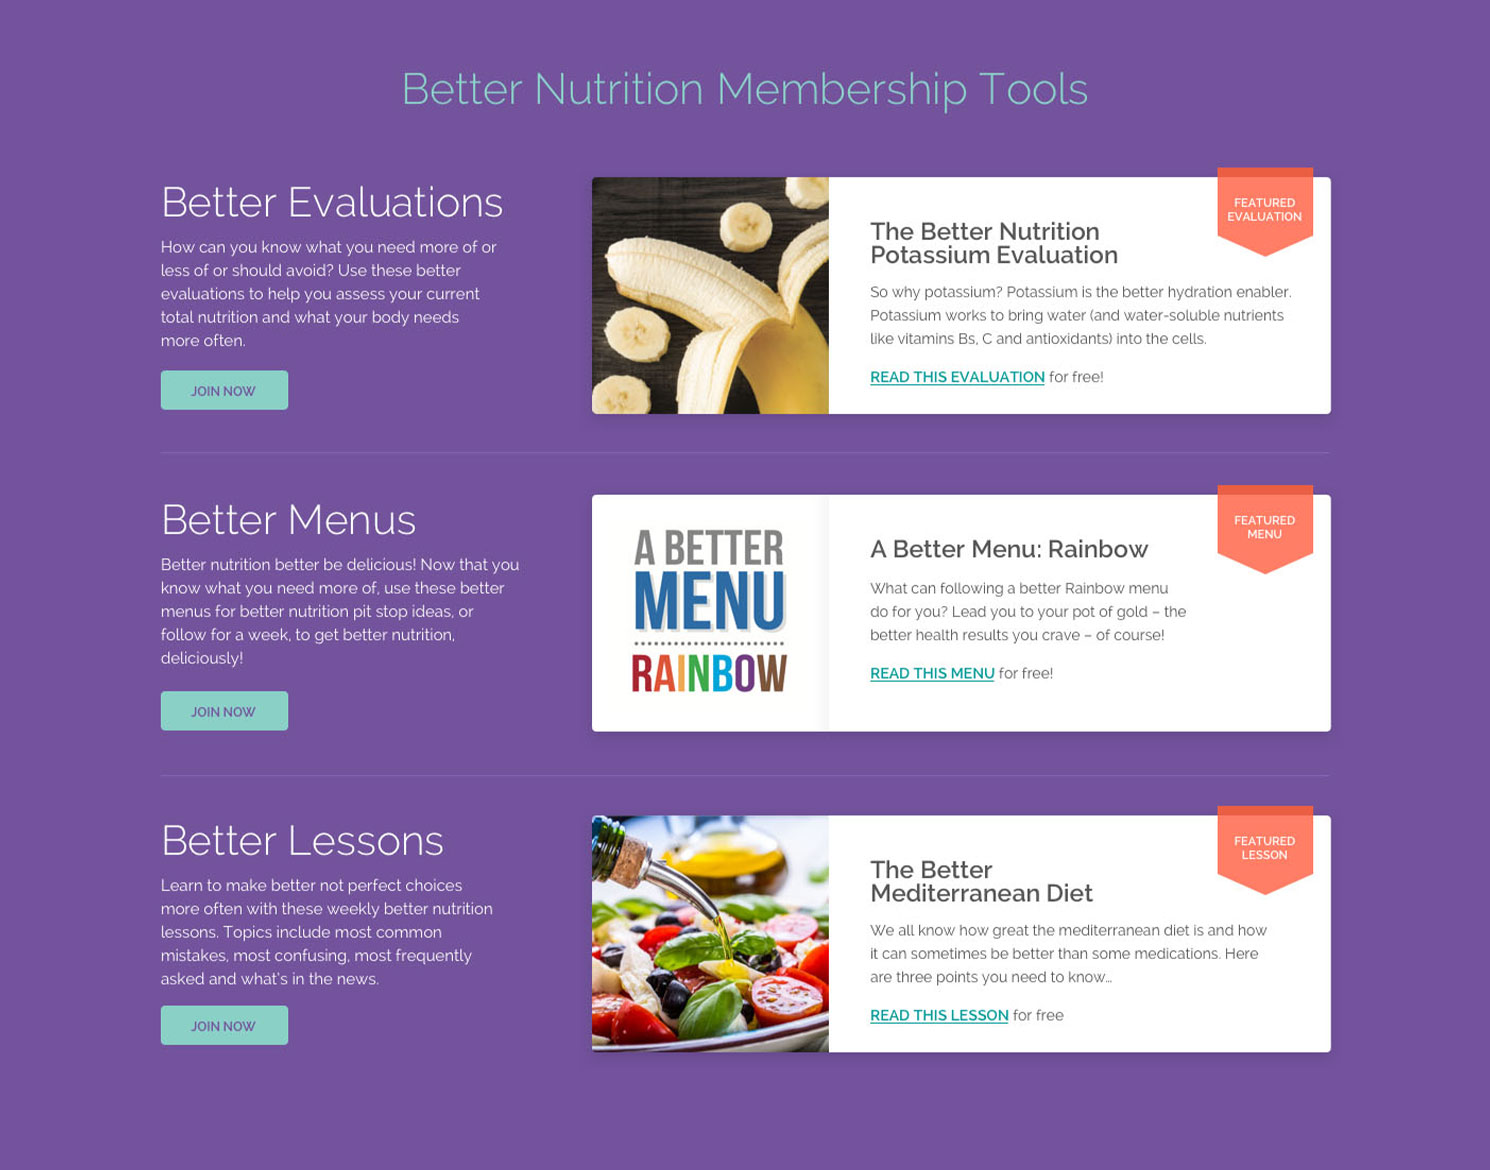 Better Nutrition website tools list including menus and lessons